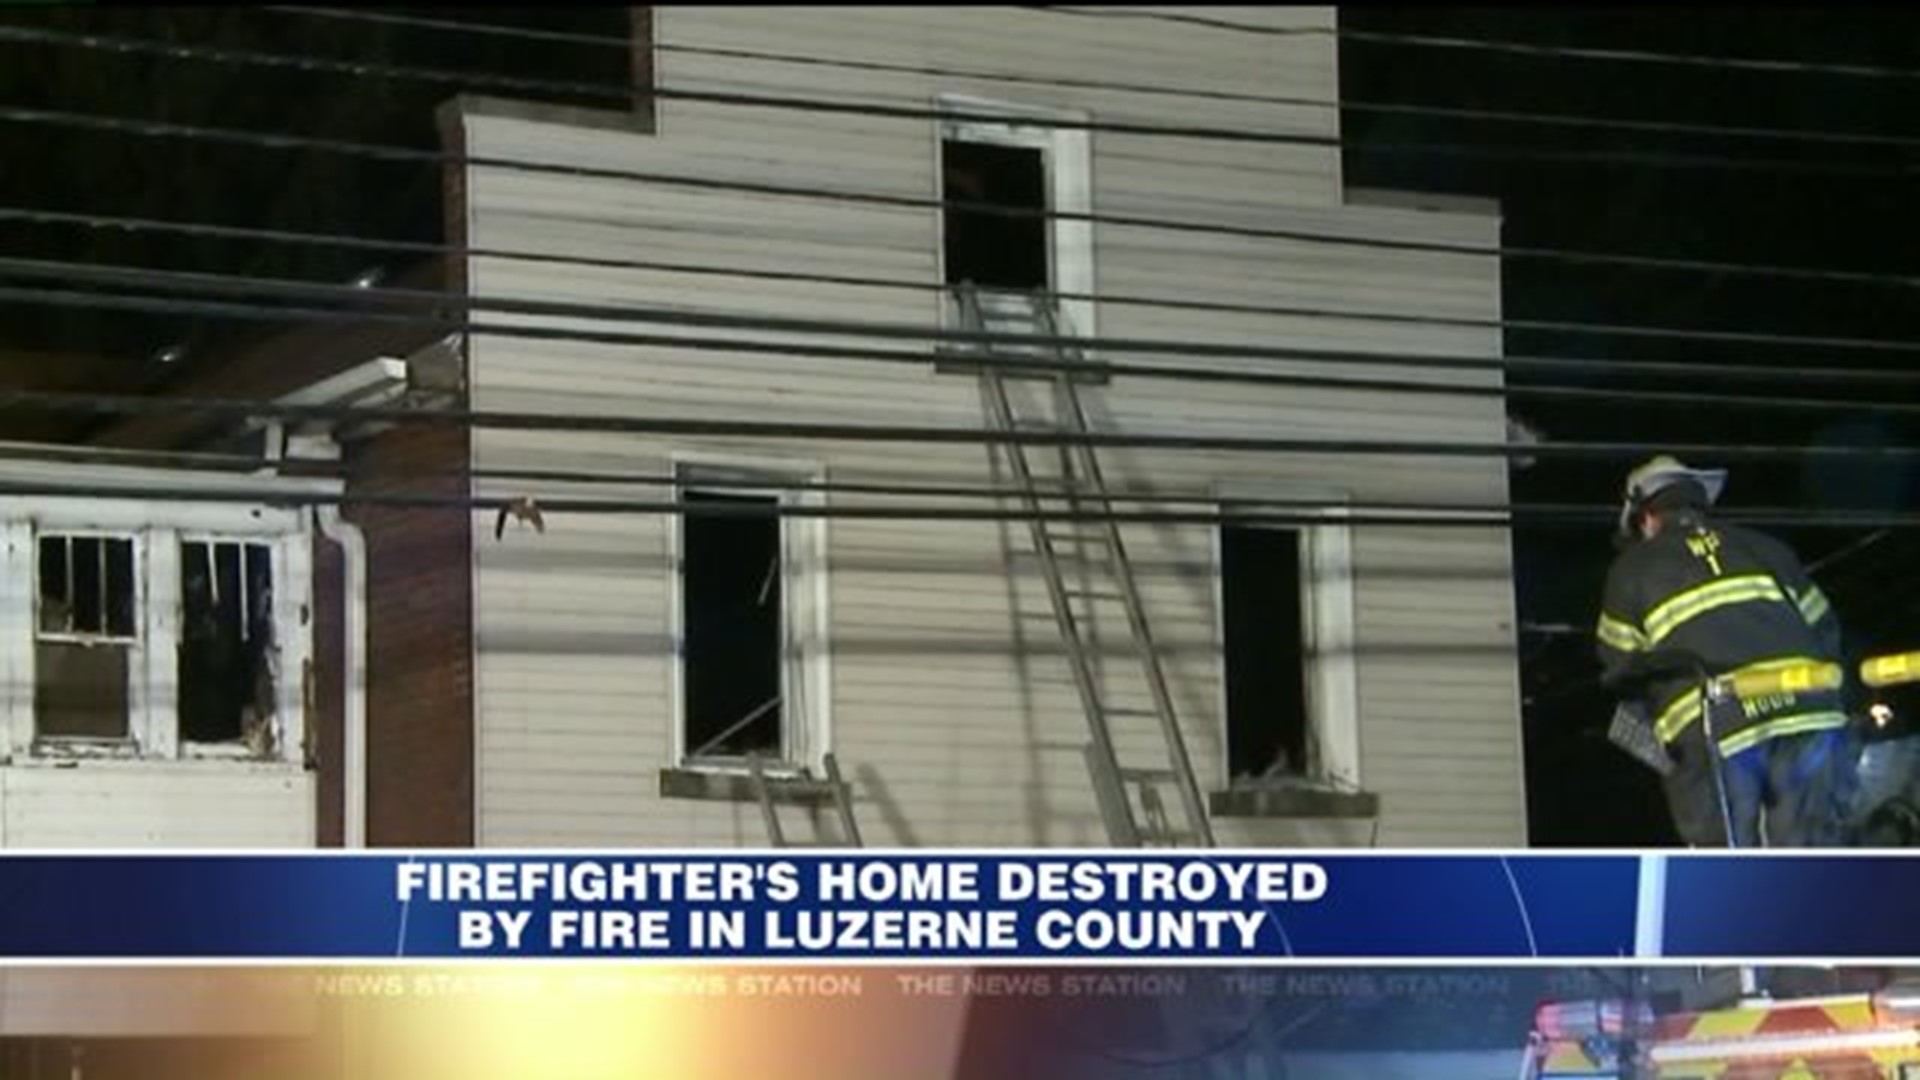 Two Dogs Killed in Blaze at Firefighter`s Home